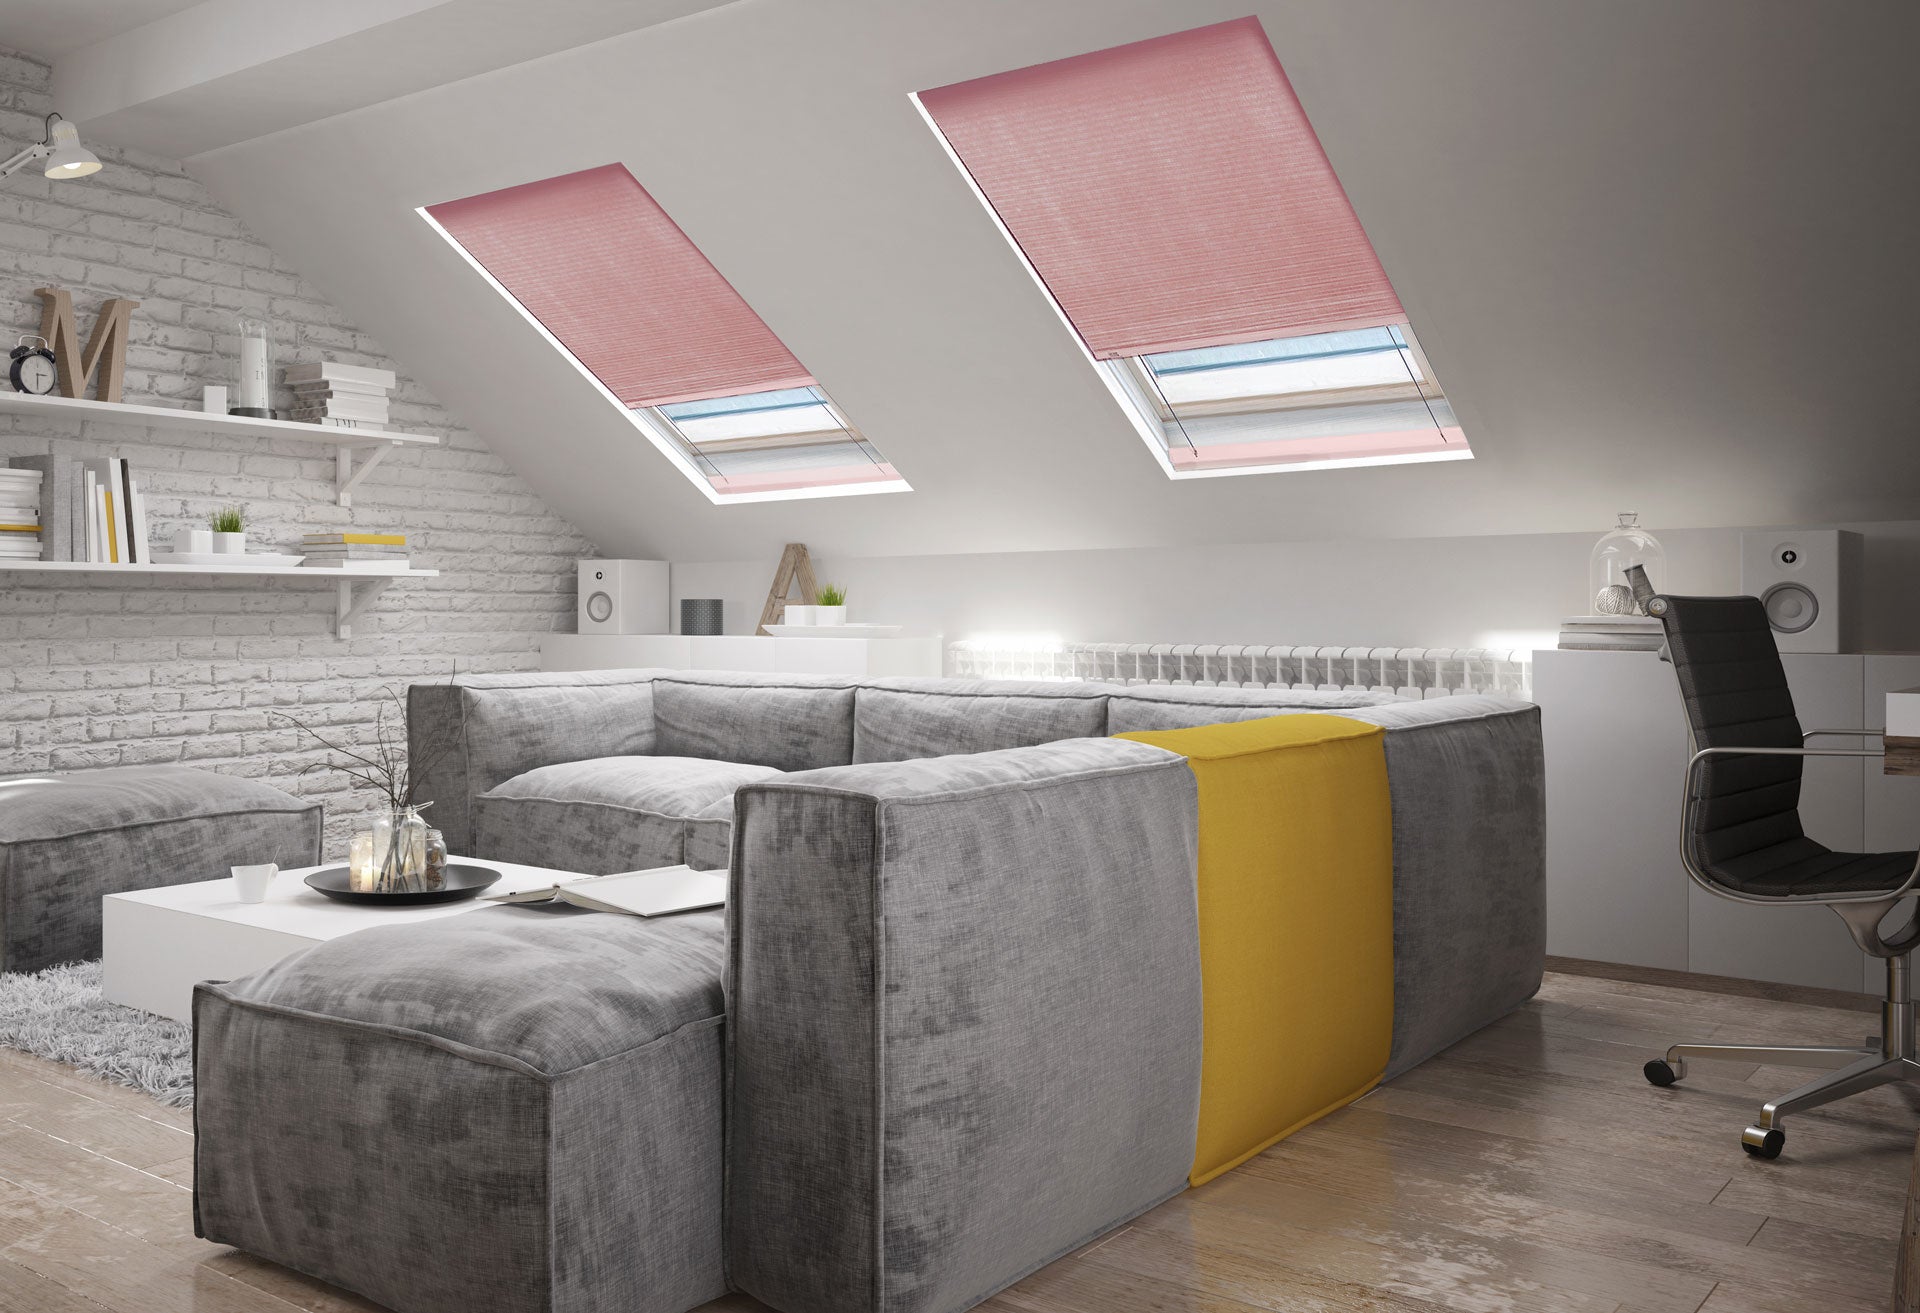 Can you put blinds on Sky Lights?